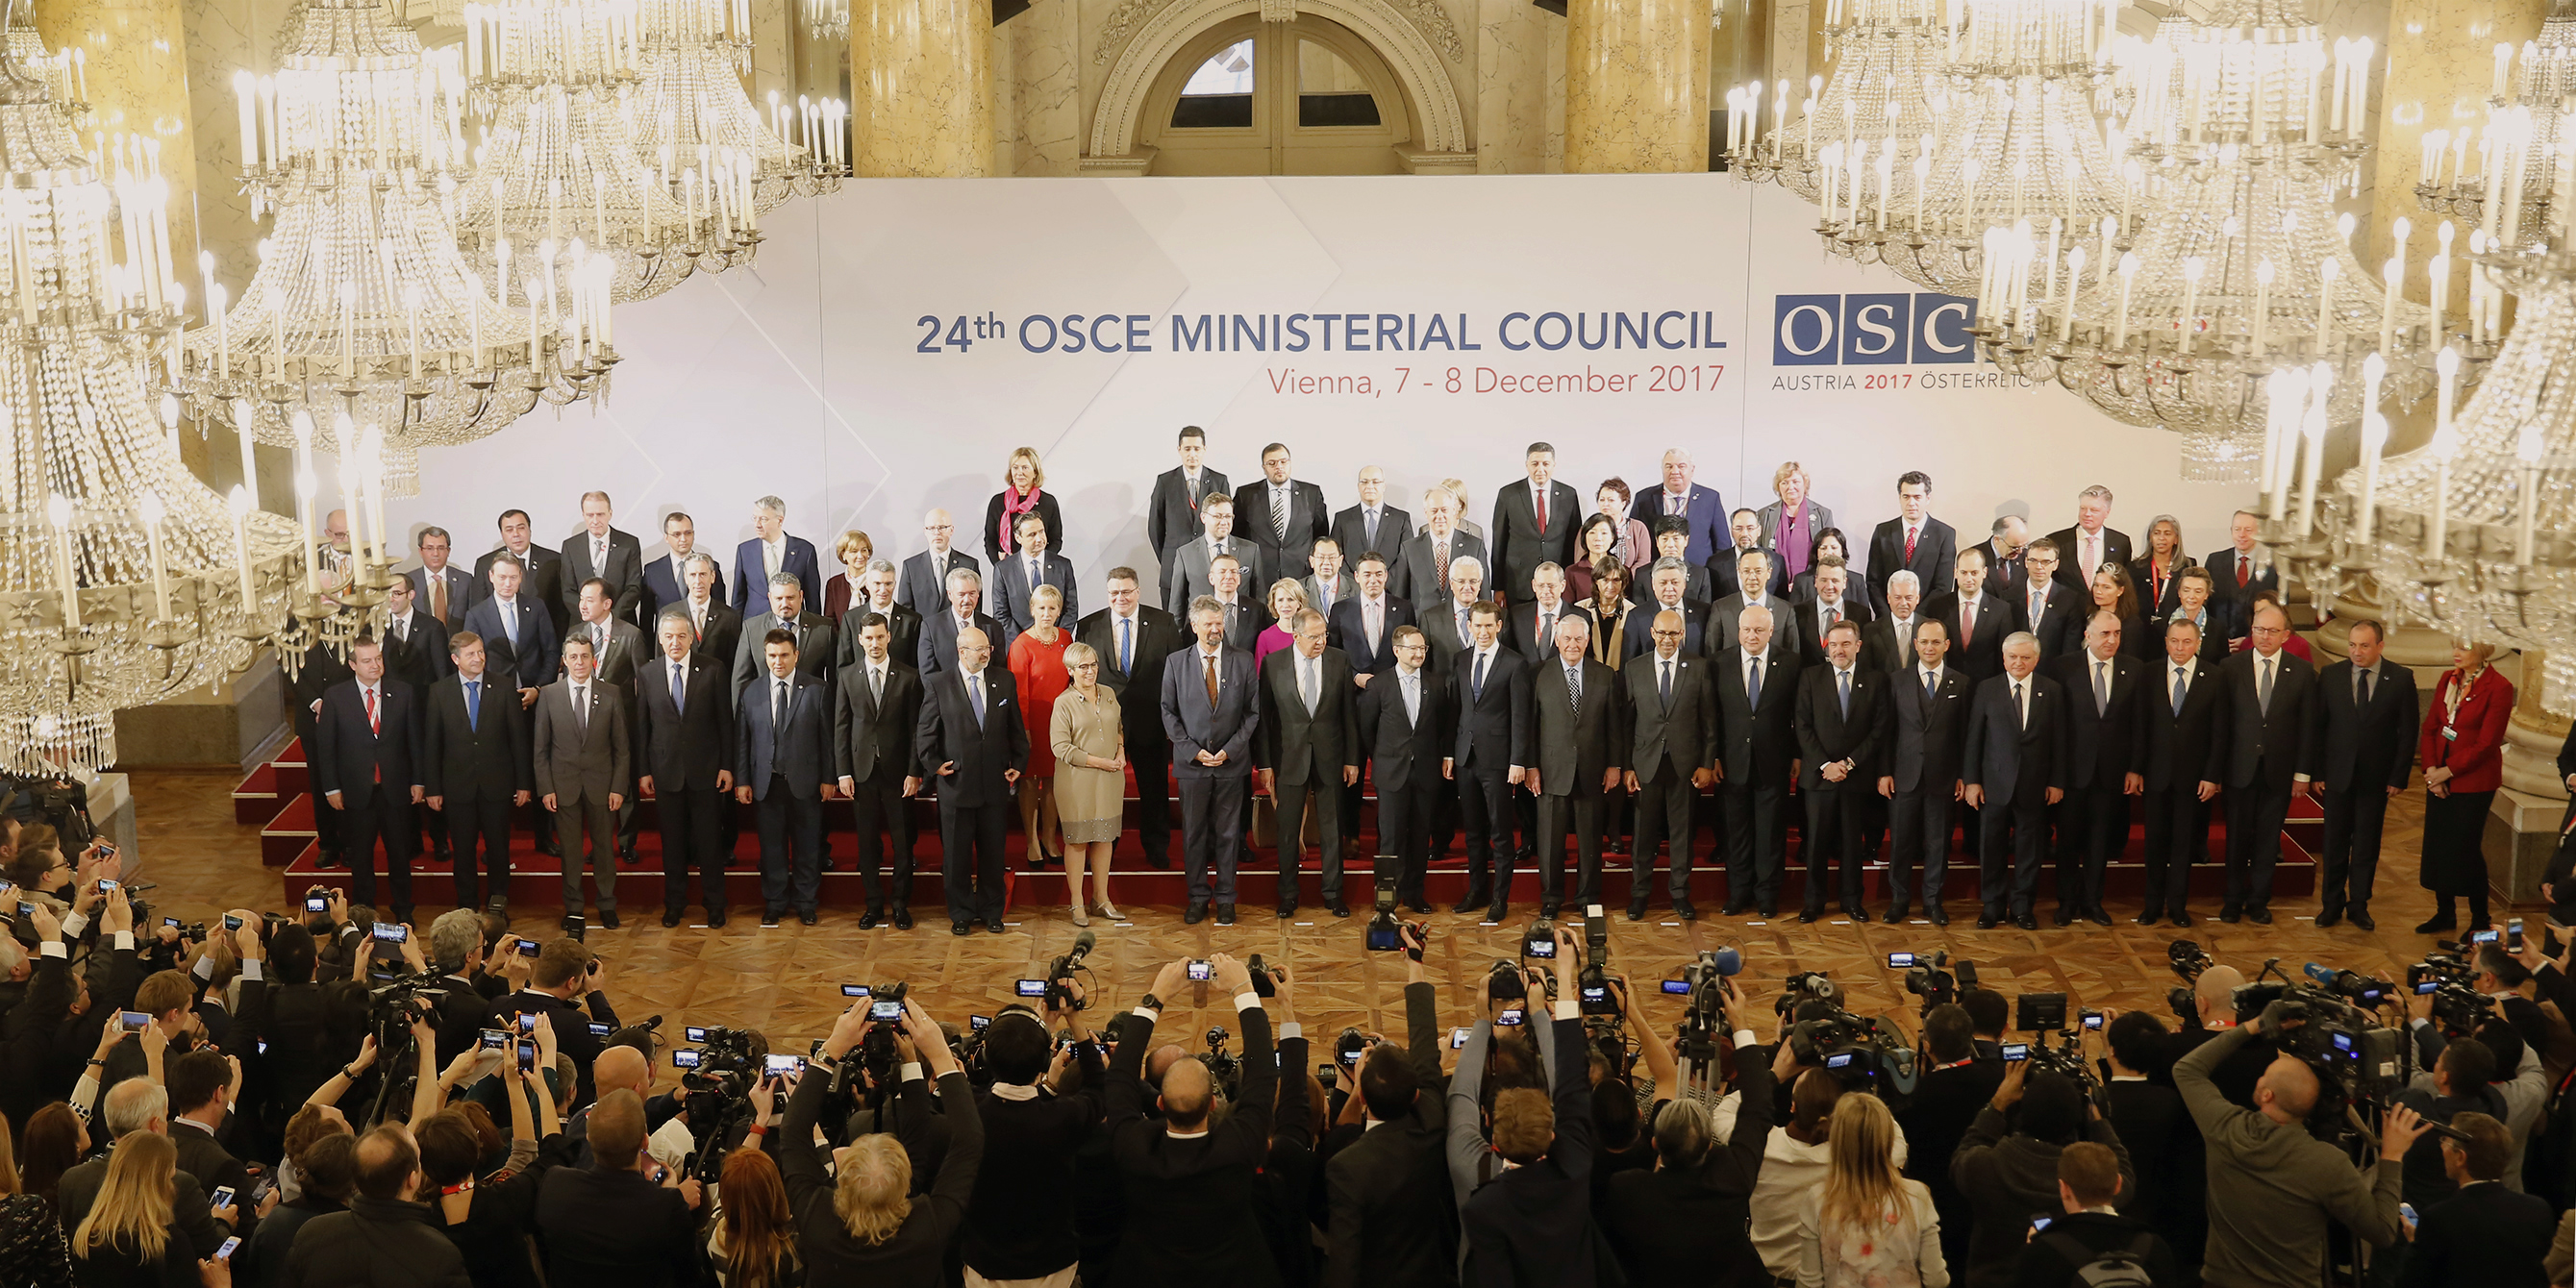 OSCE Foreign Ministers and Heads of Delegations pose for a family photo at the 24th Ministerial Council in Vienna, 7 December 2017.